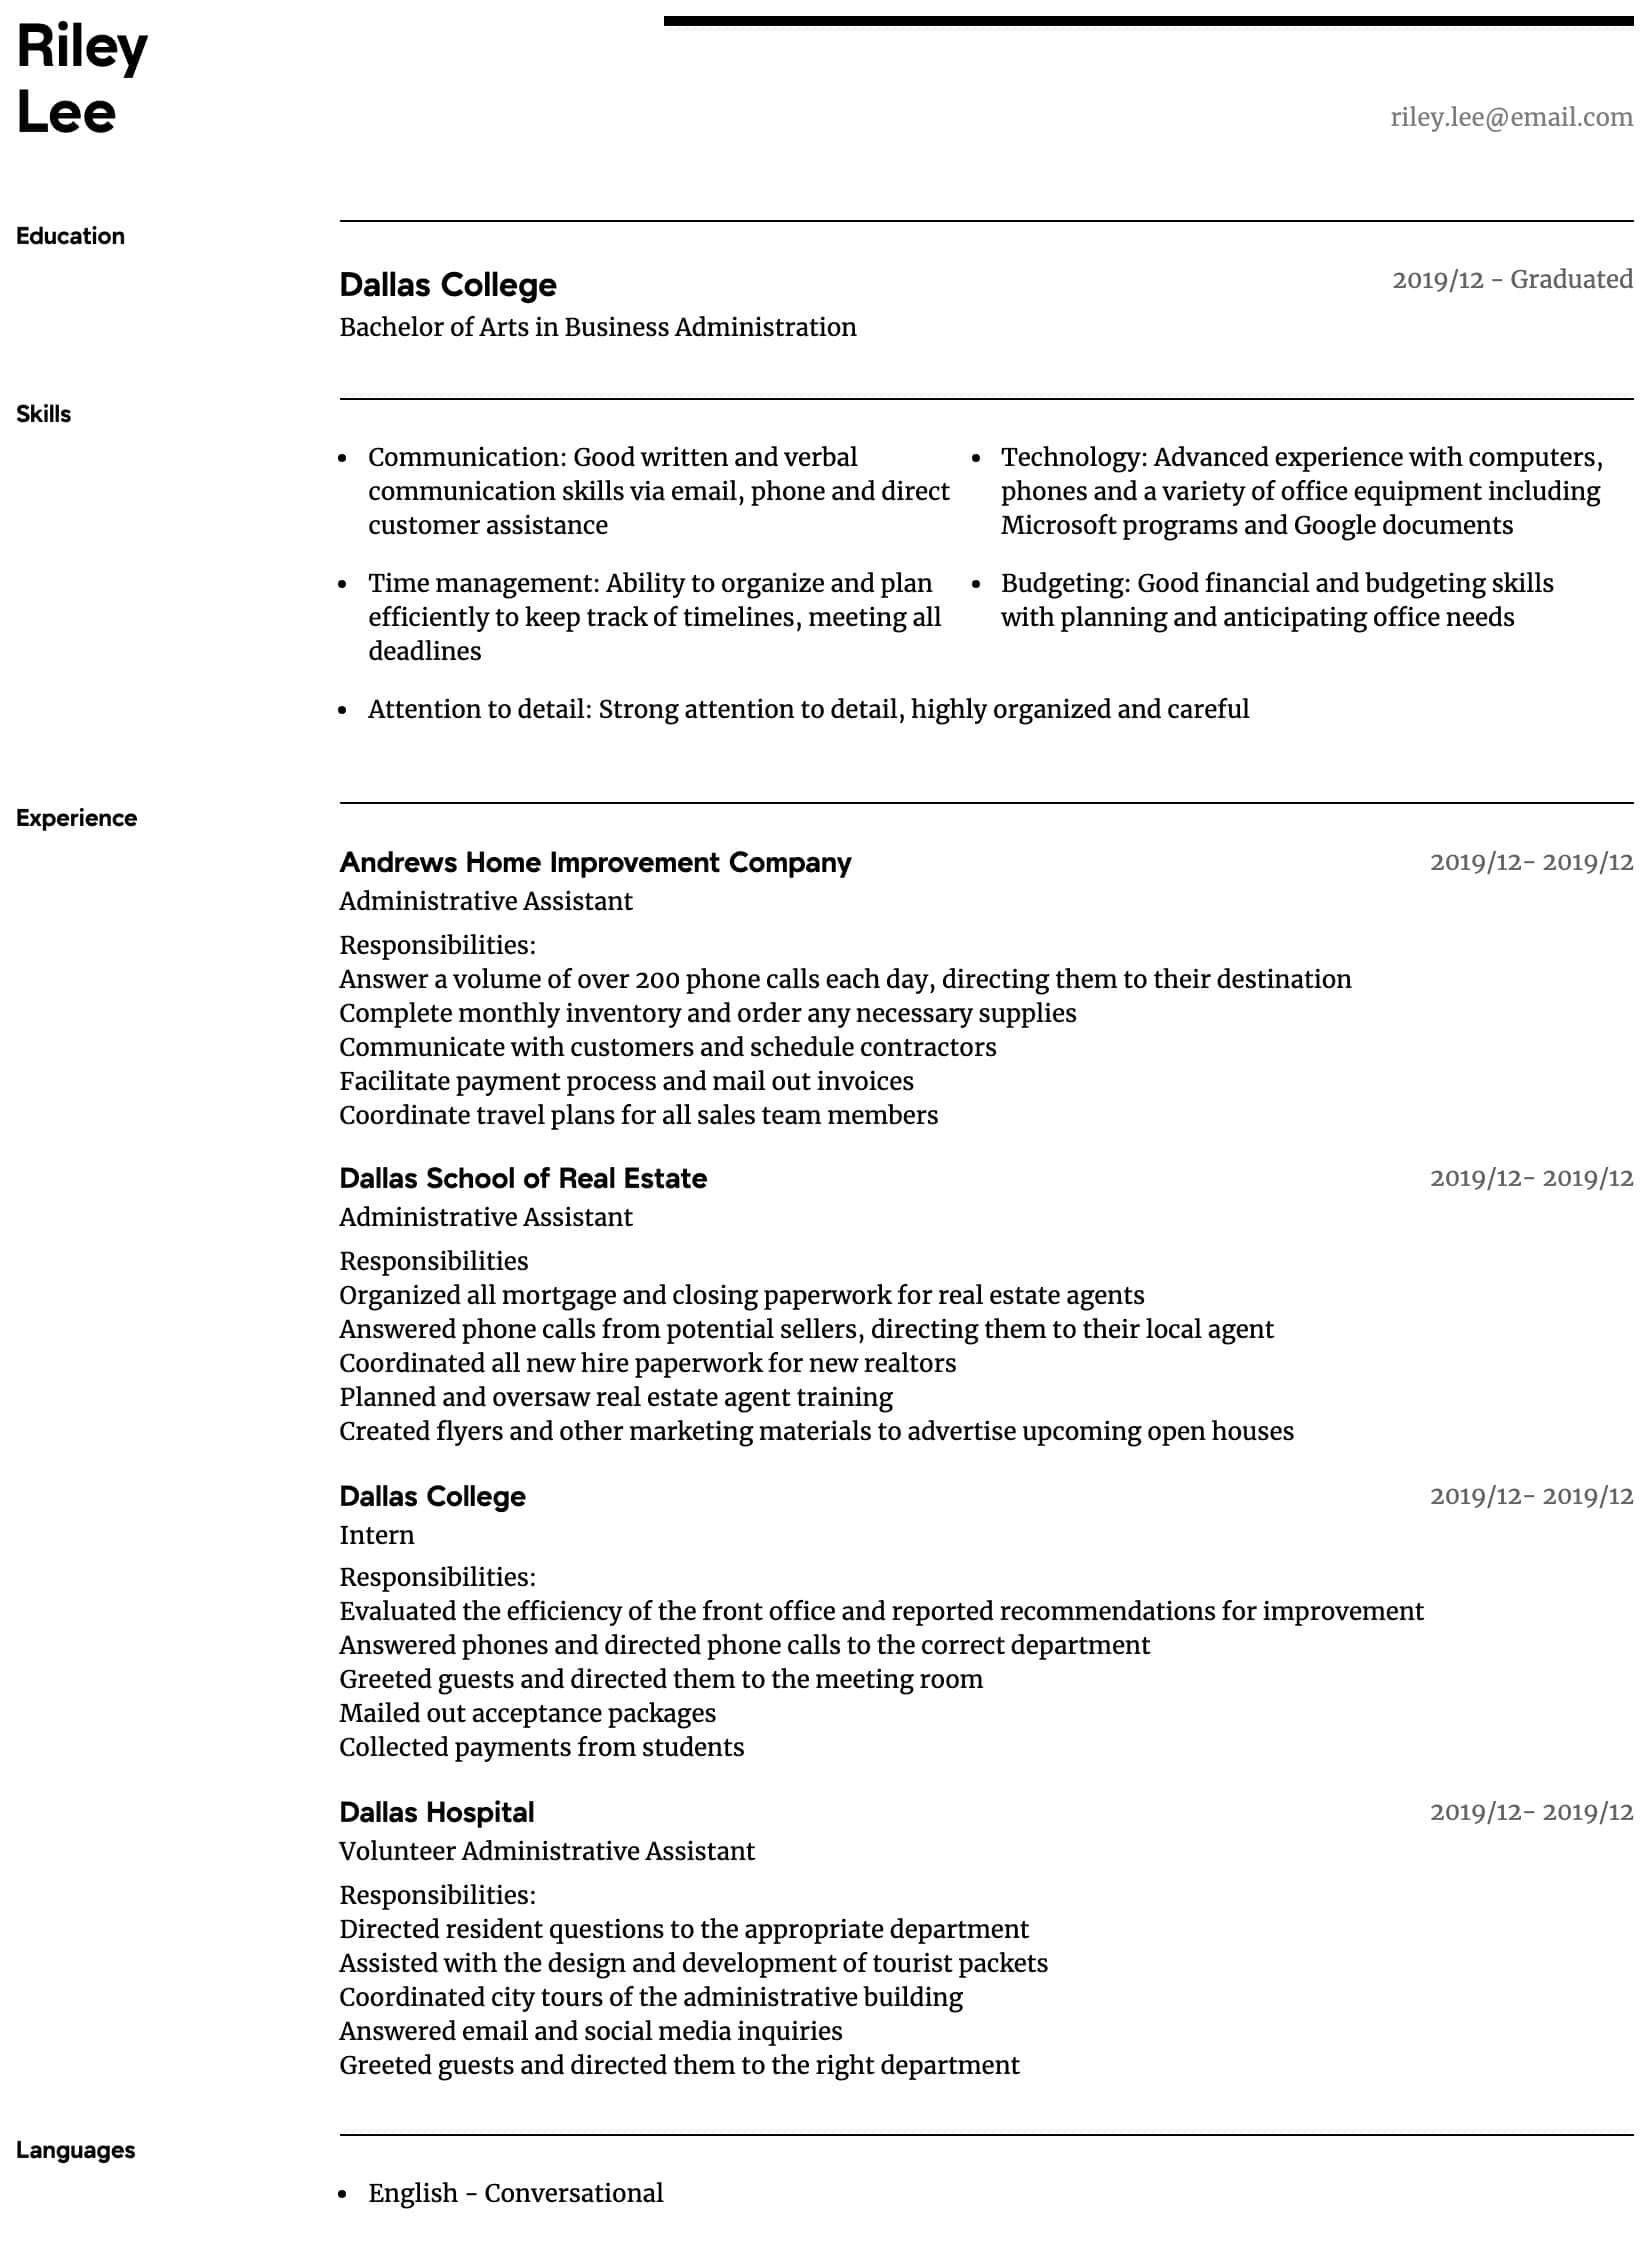 Skills Based Resume Template Administrative assistant Administrative assistant Resume Samples All Experience Levels …